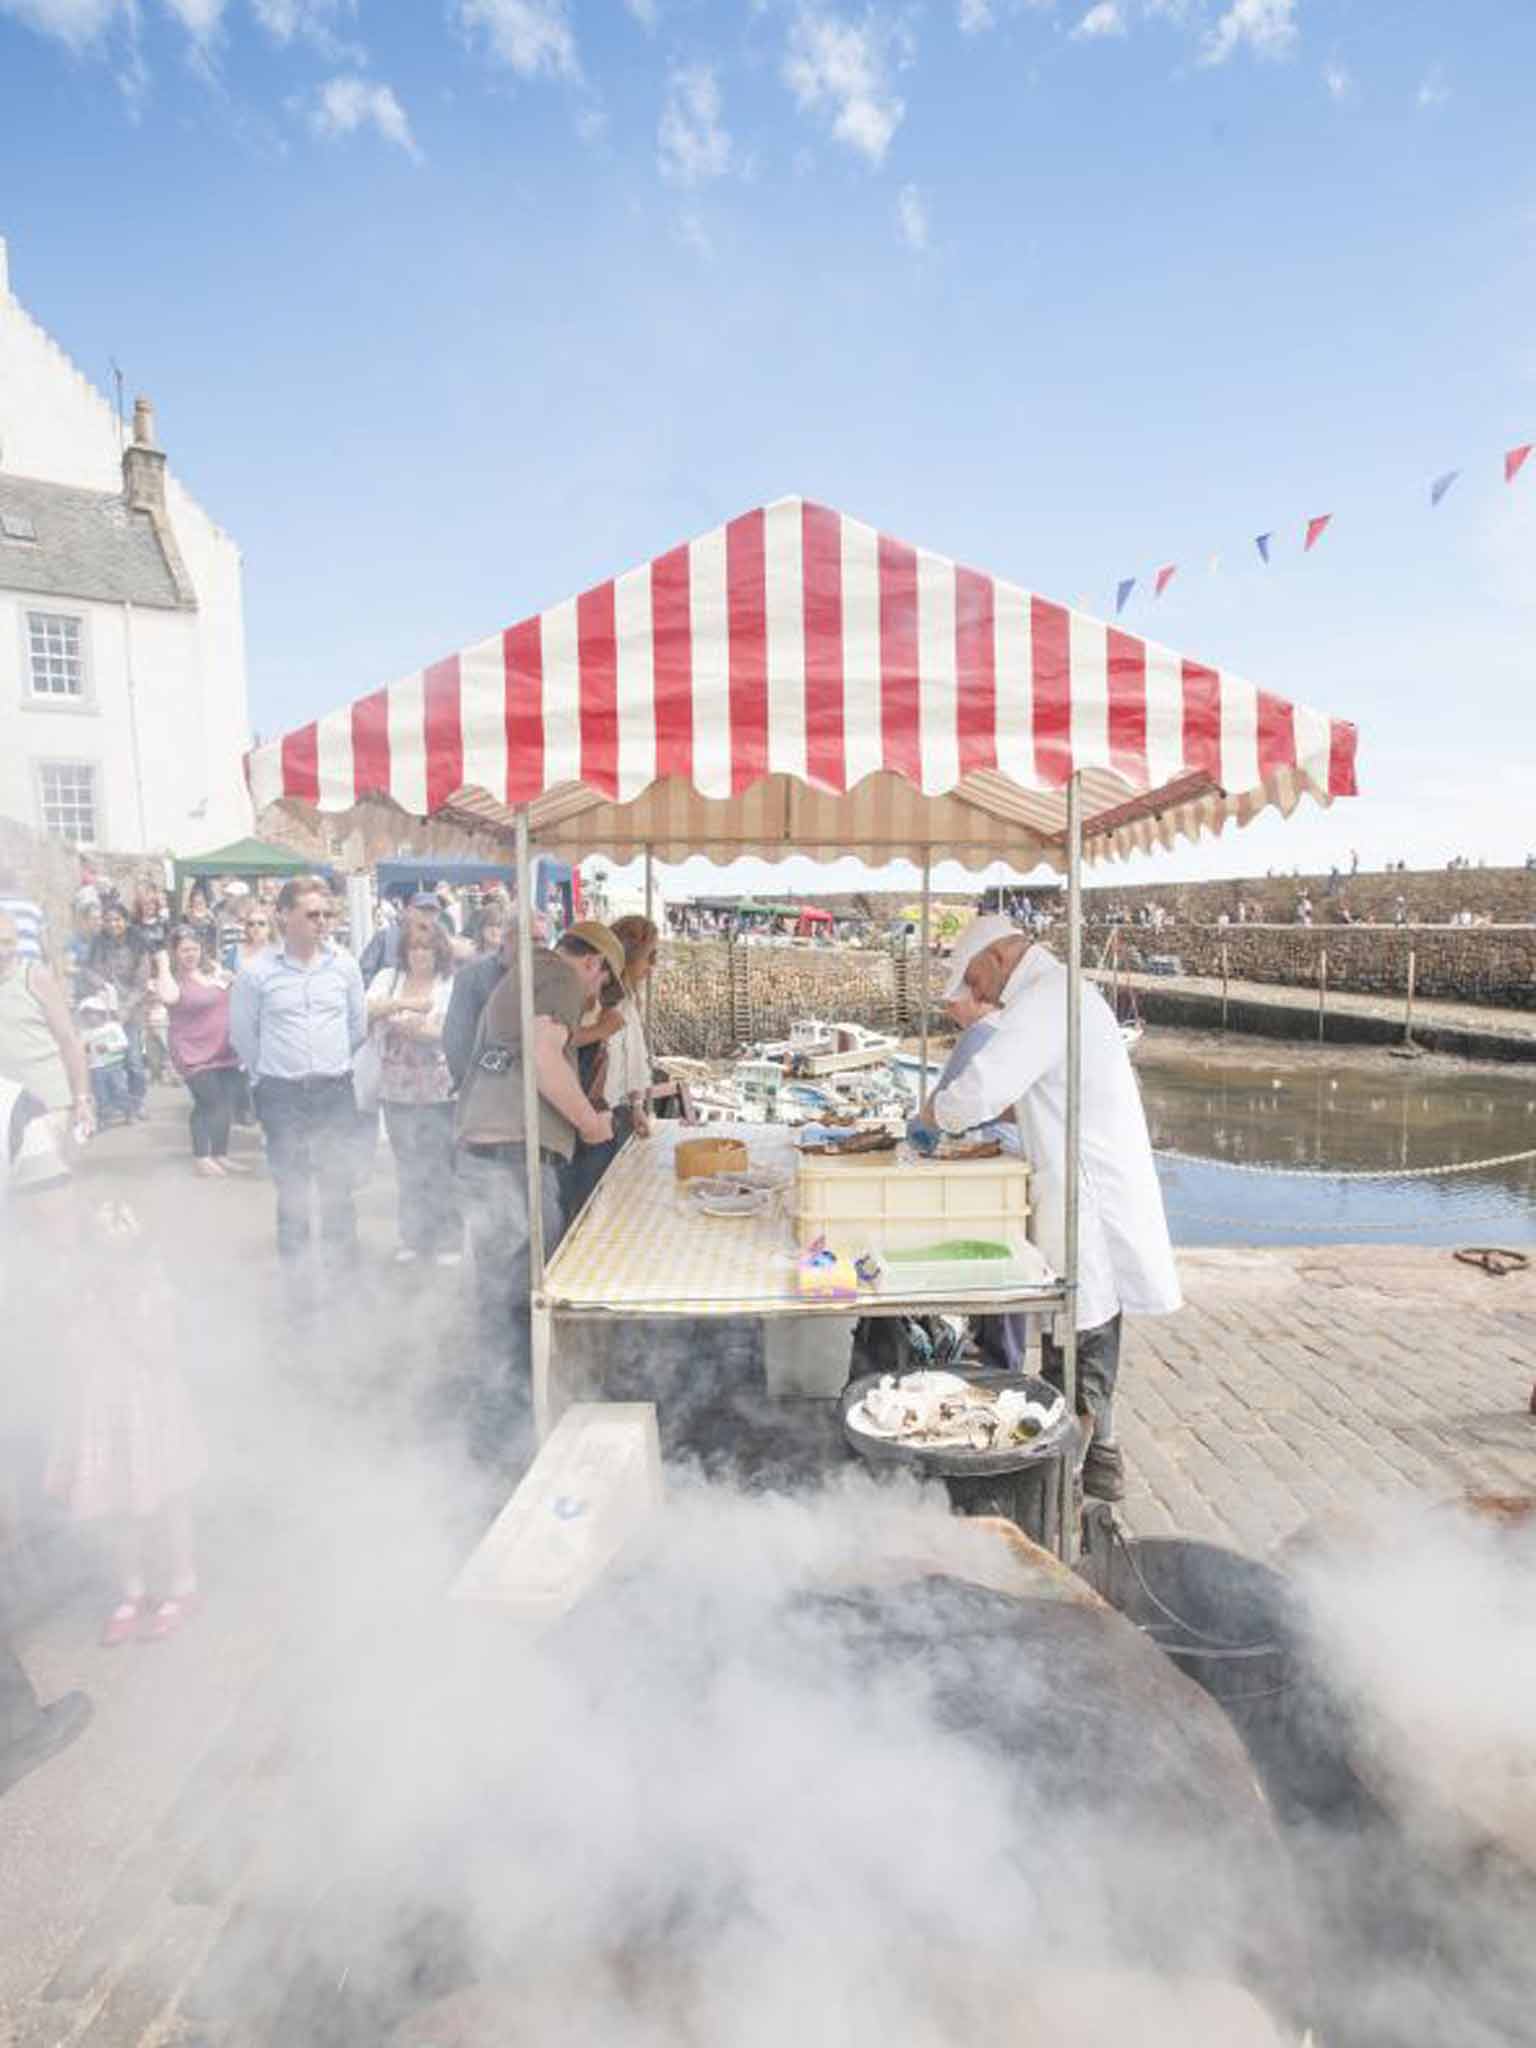 Crail Food Festival takes place on the coast of Fife, 12-14 June